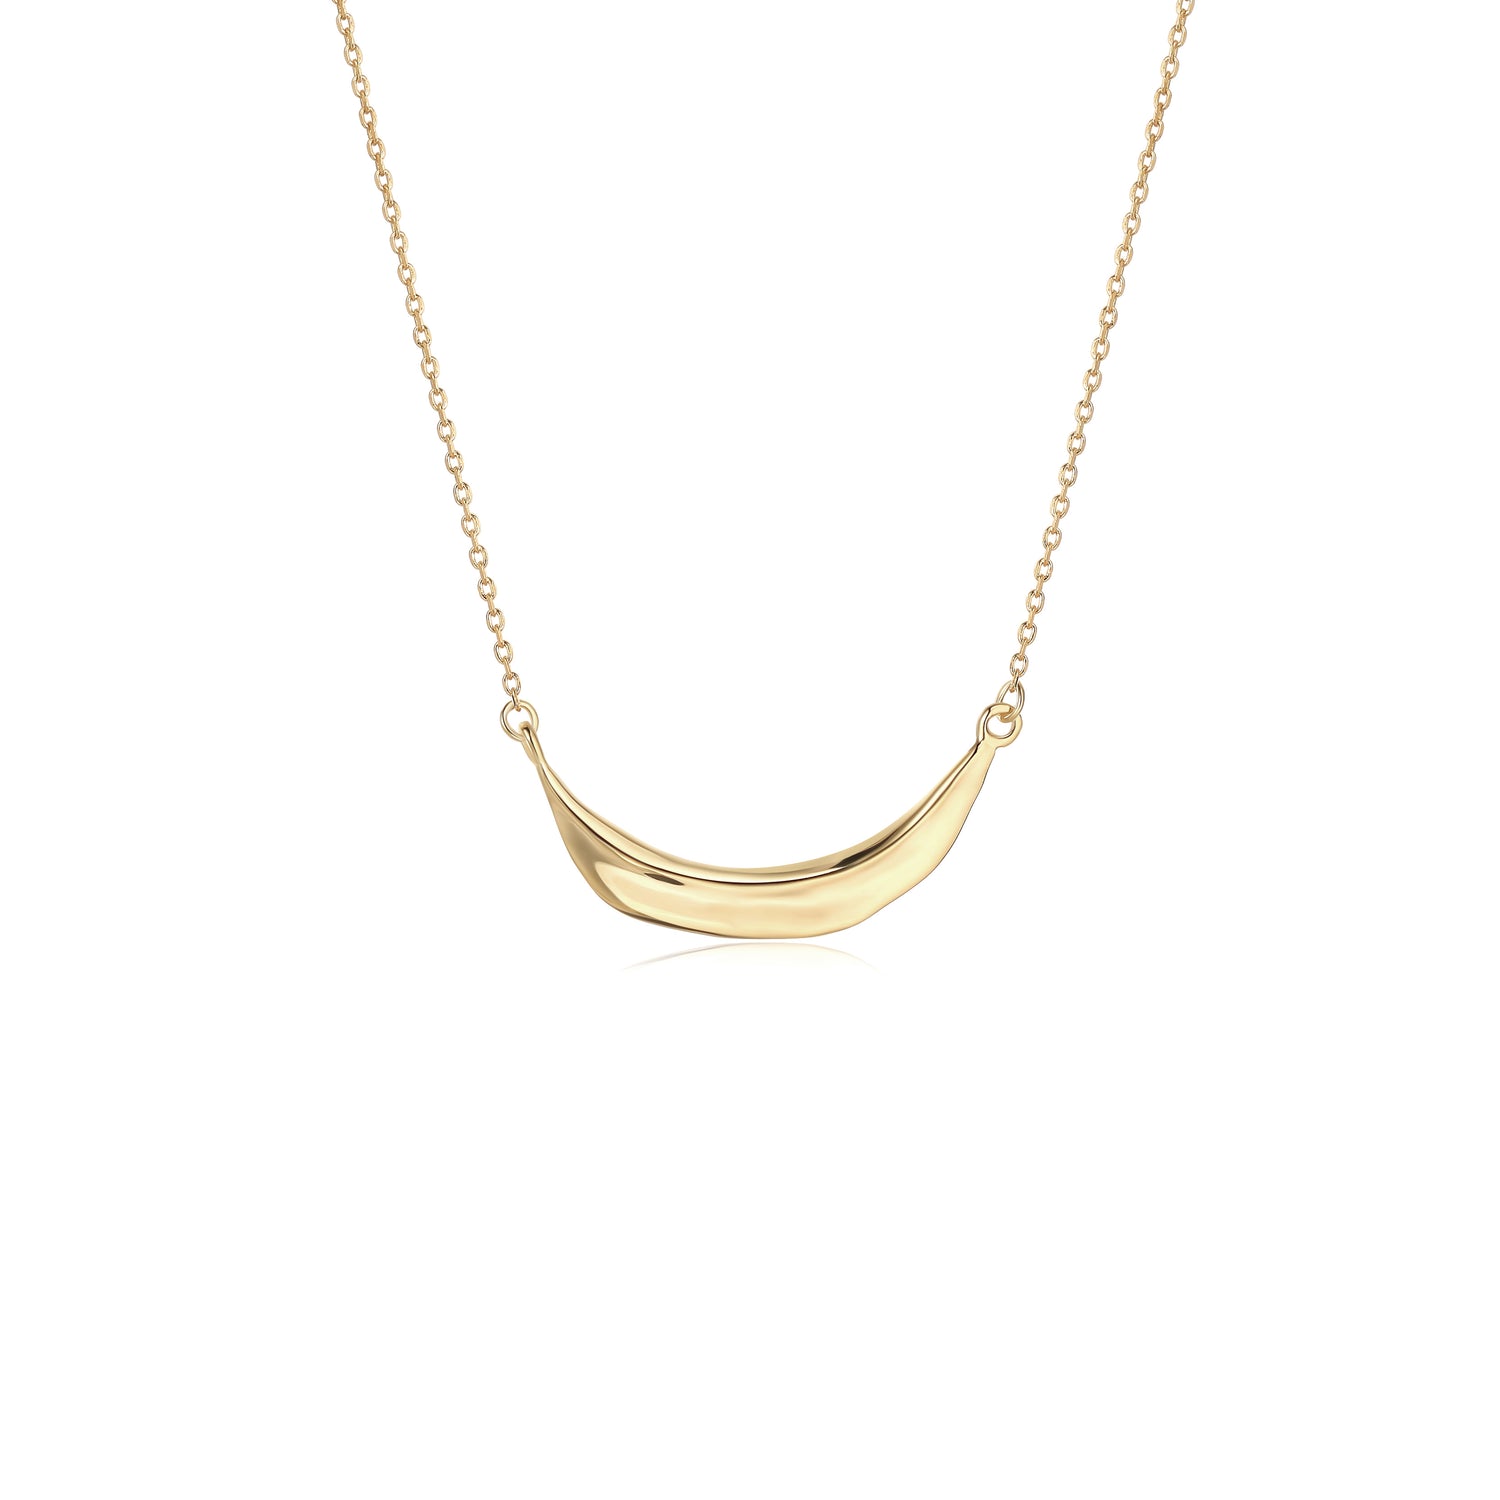 Beigy Necklace - Solid Gold